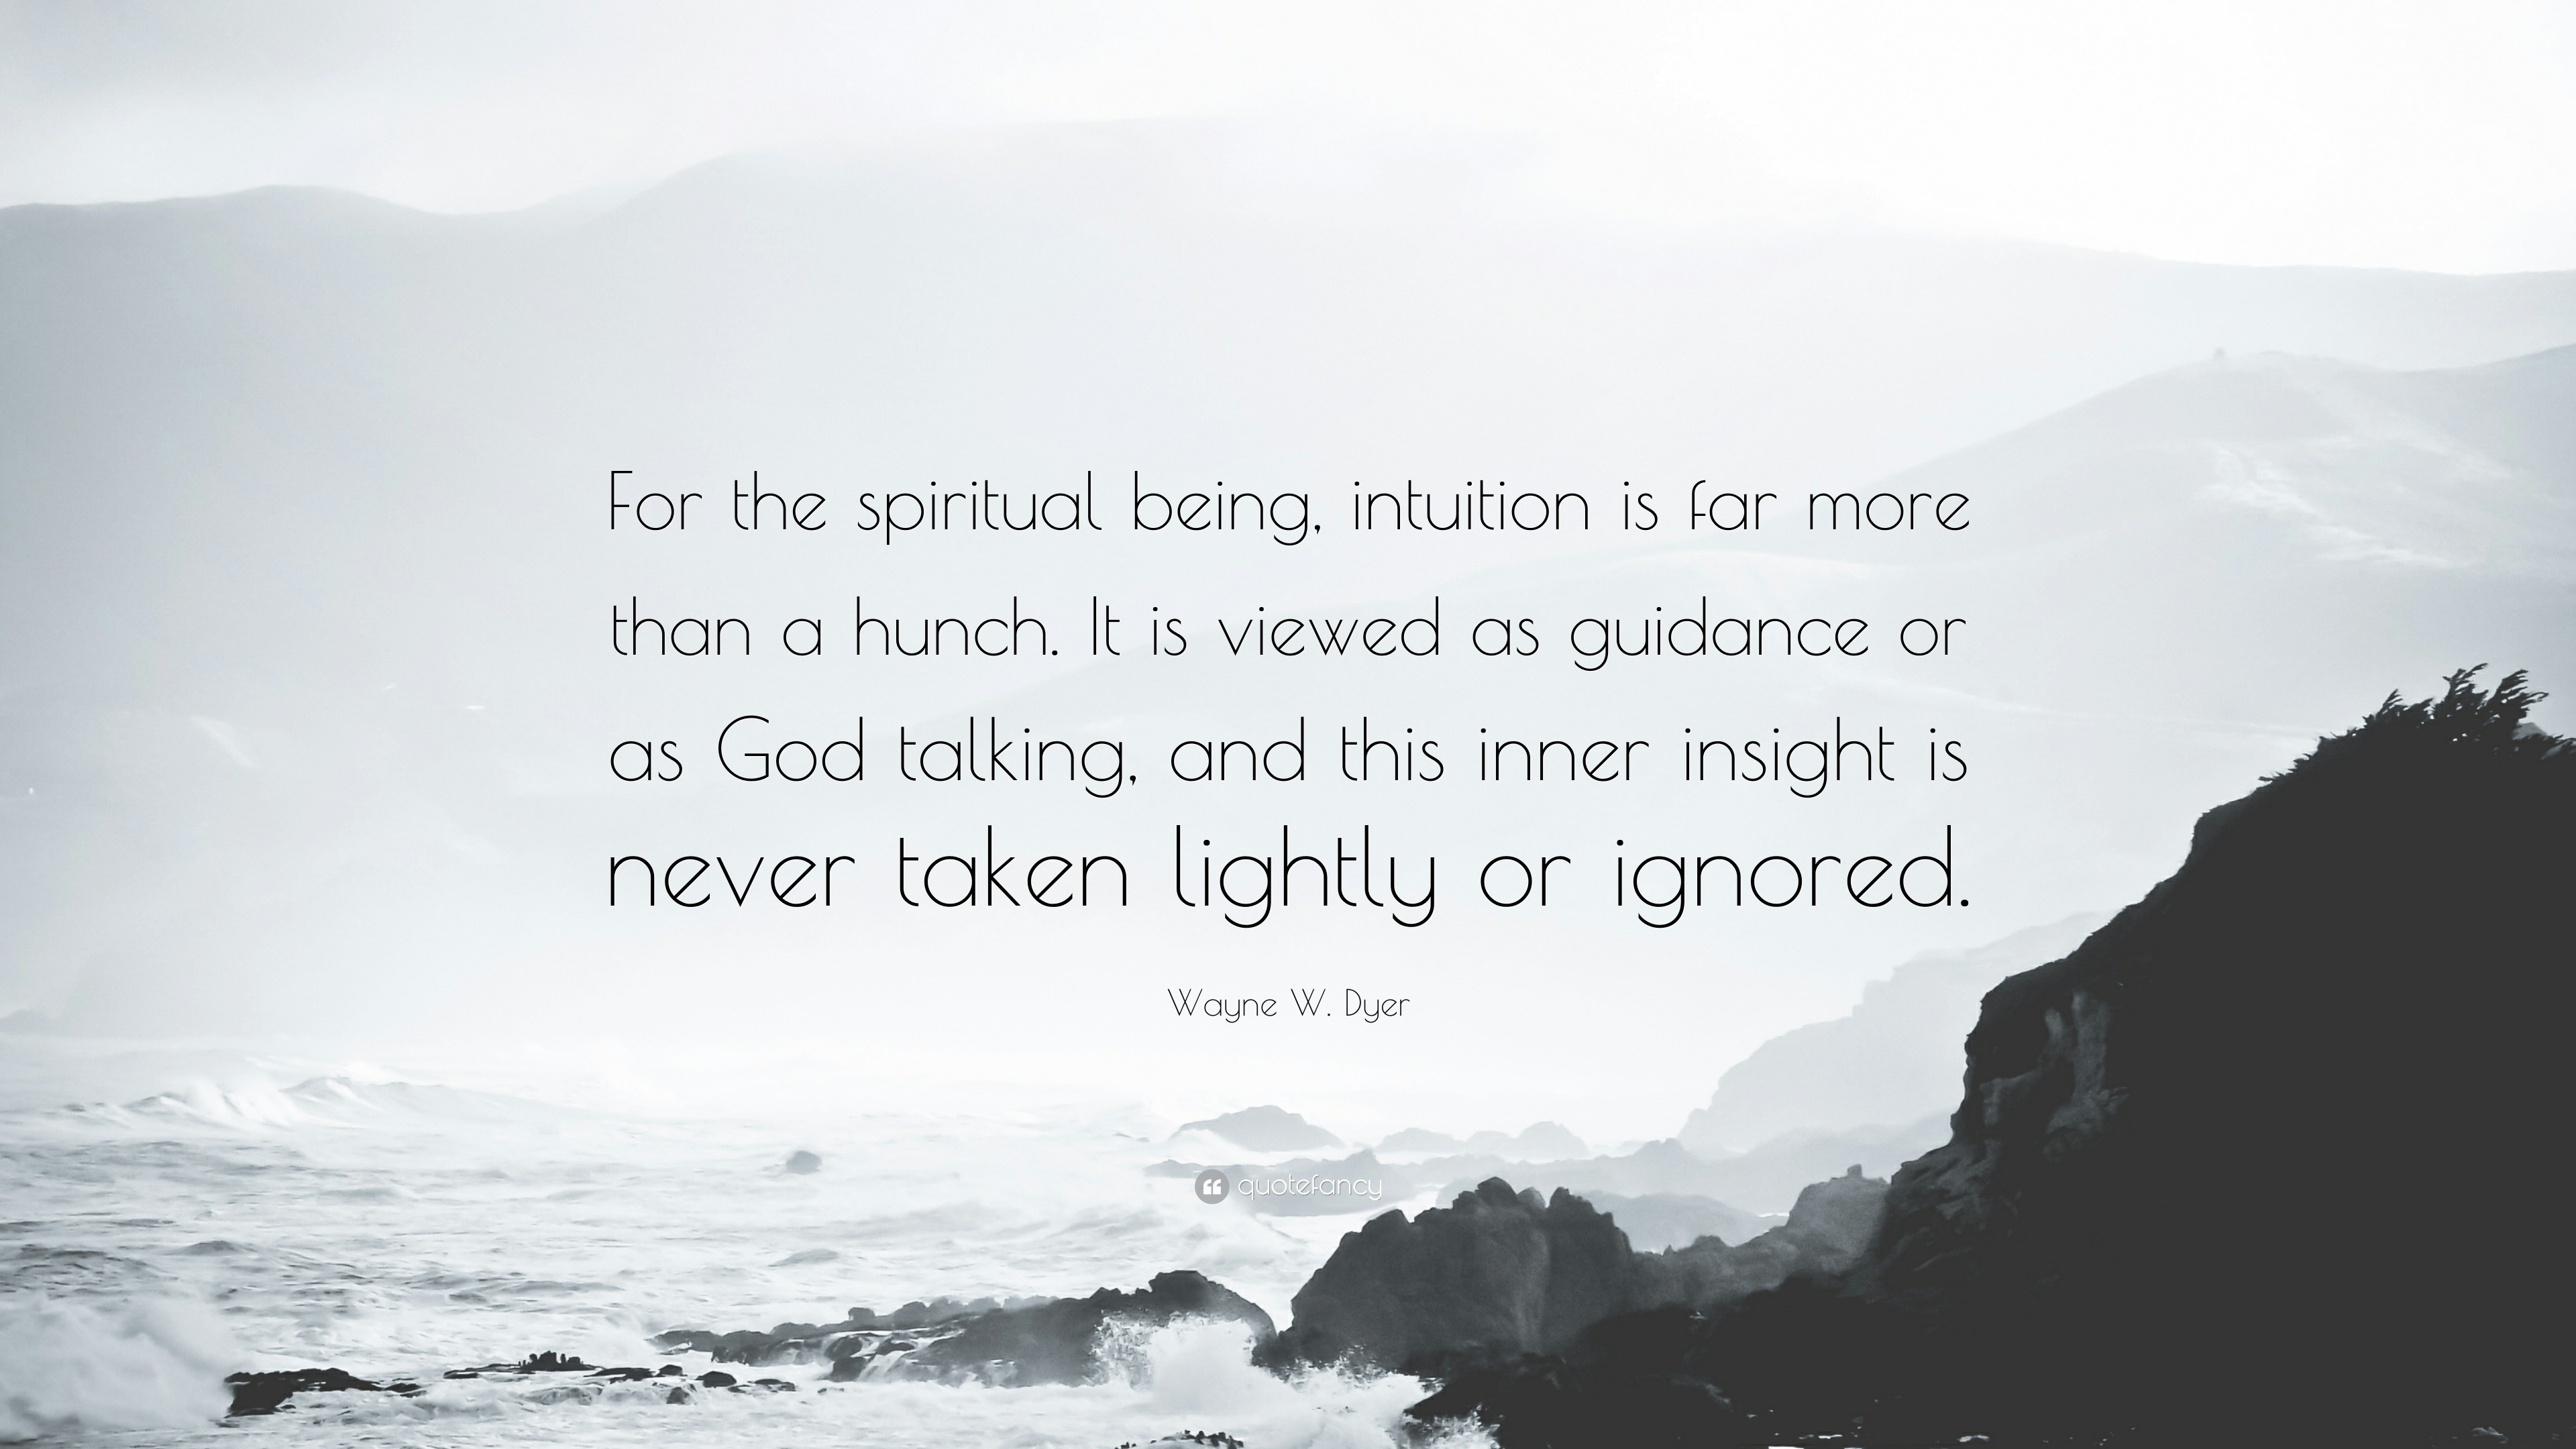 Wayne W. Dyer Quote: “For the spiritual being, intuition is far